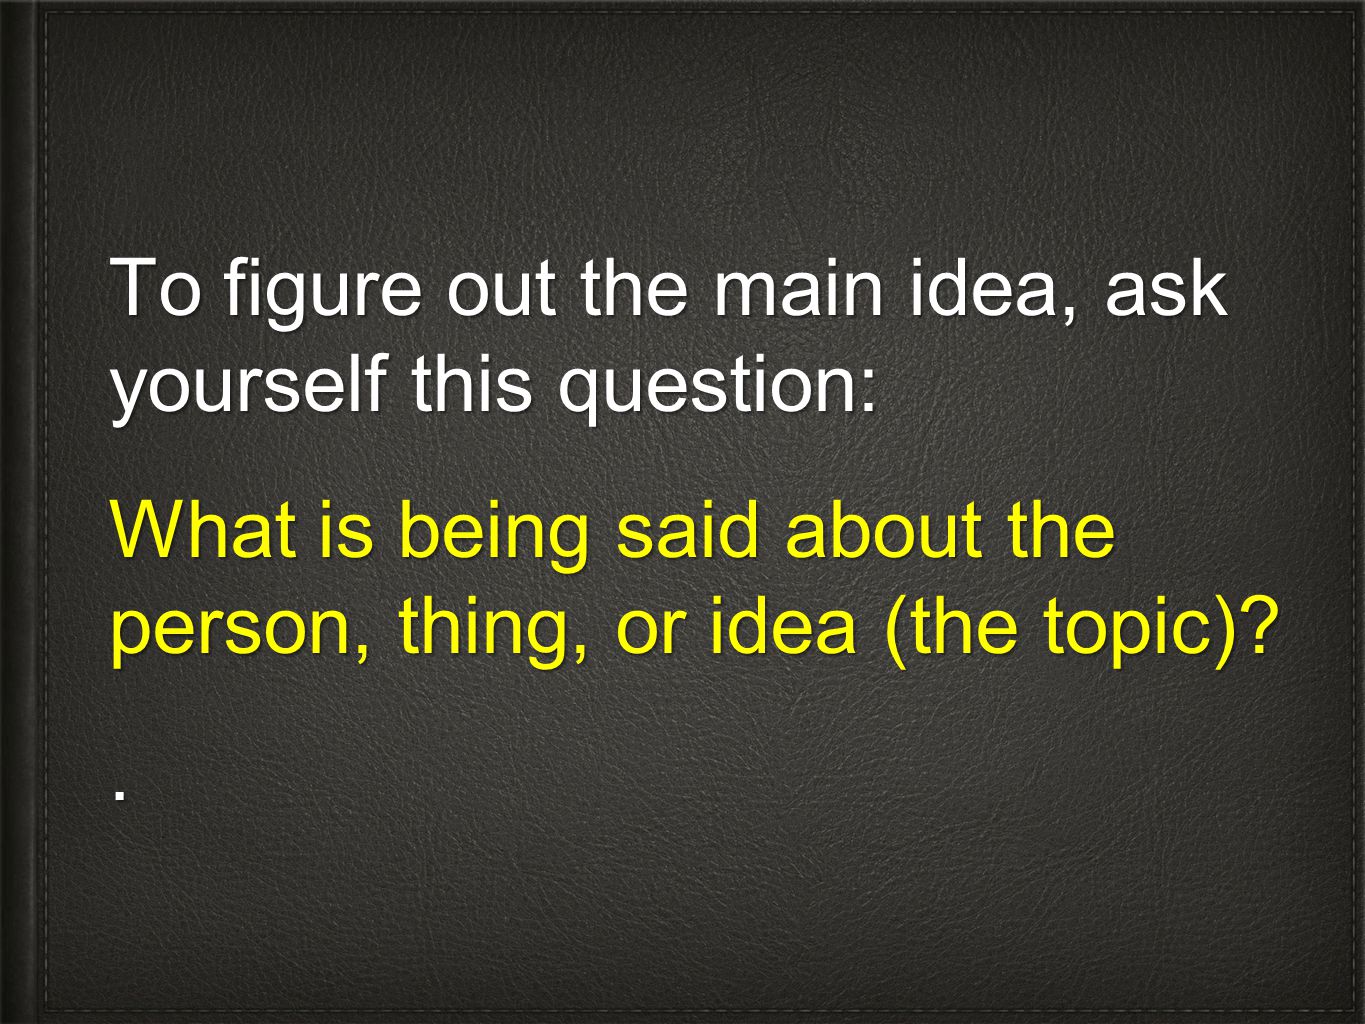 To figure out the main idea, ask yourself this question: What is being said about the person, thing, or idea (the topic) .